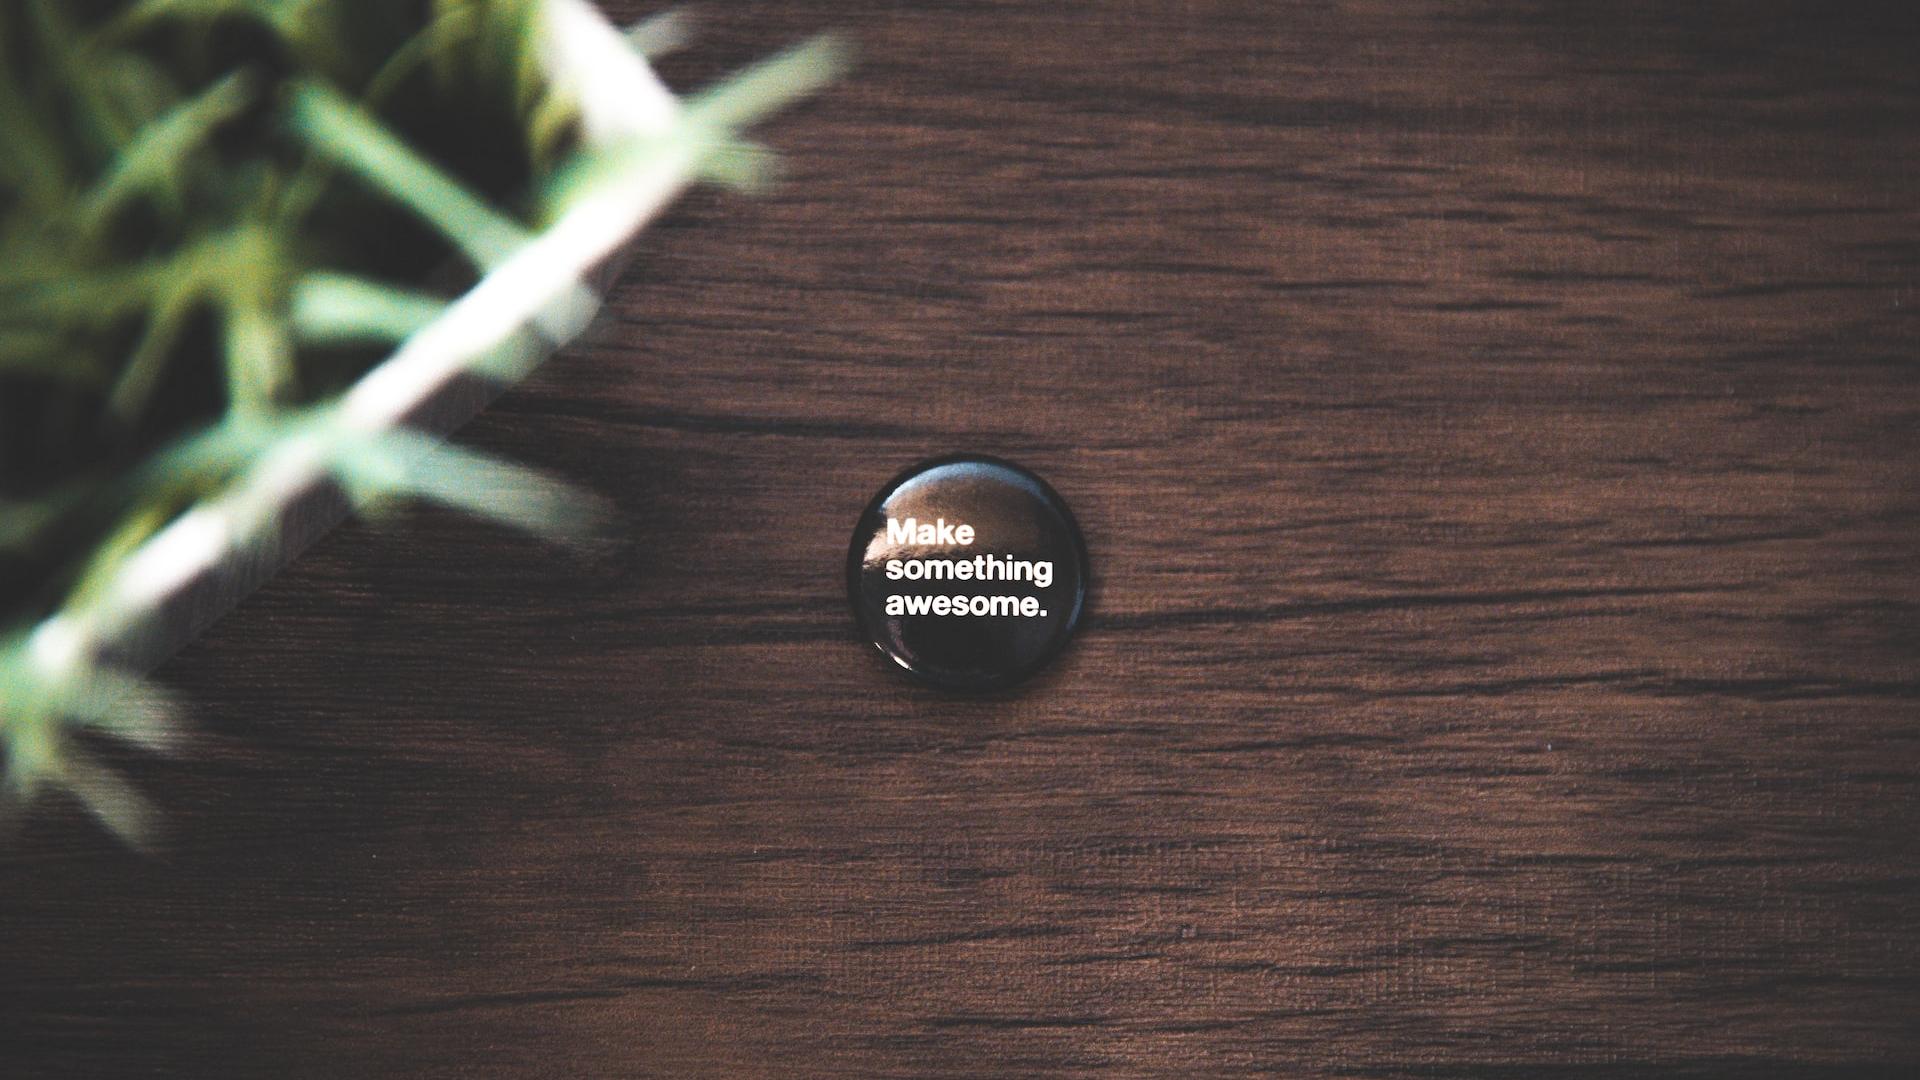 round black button pin on brown wooden surface